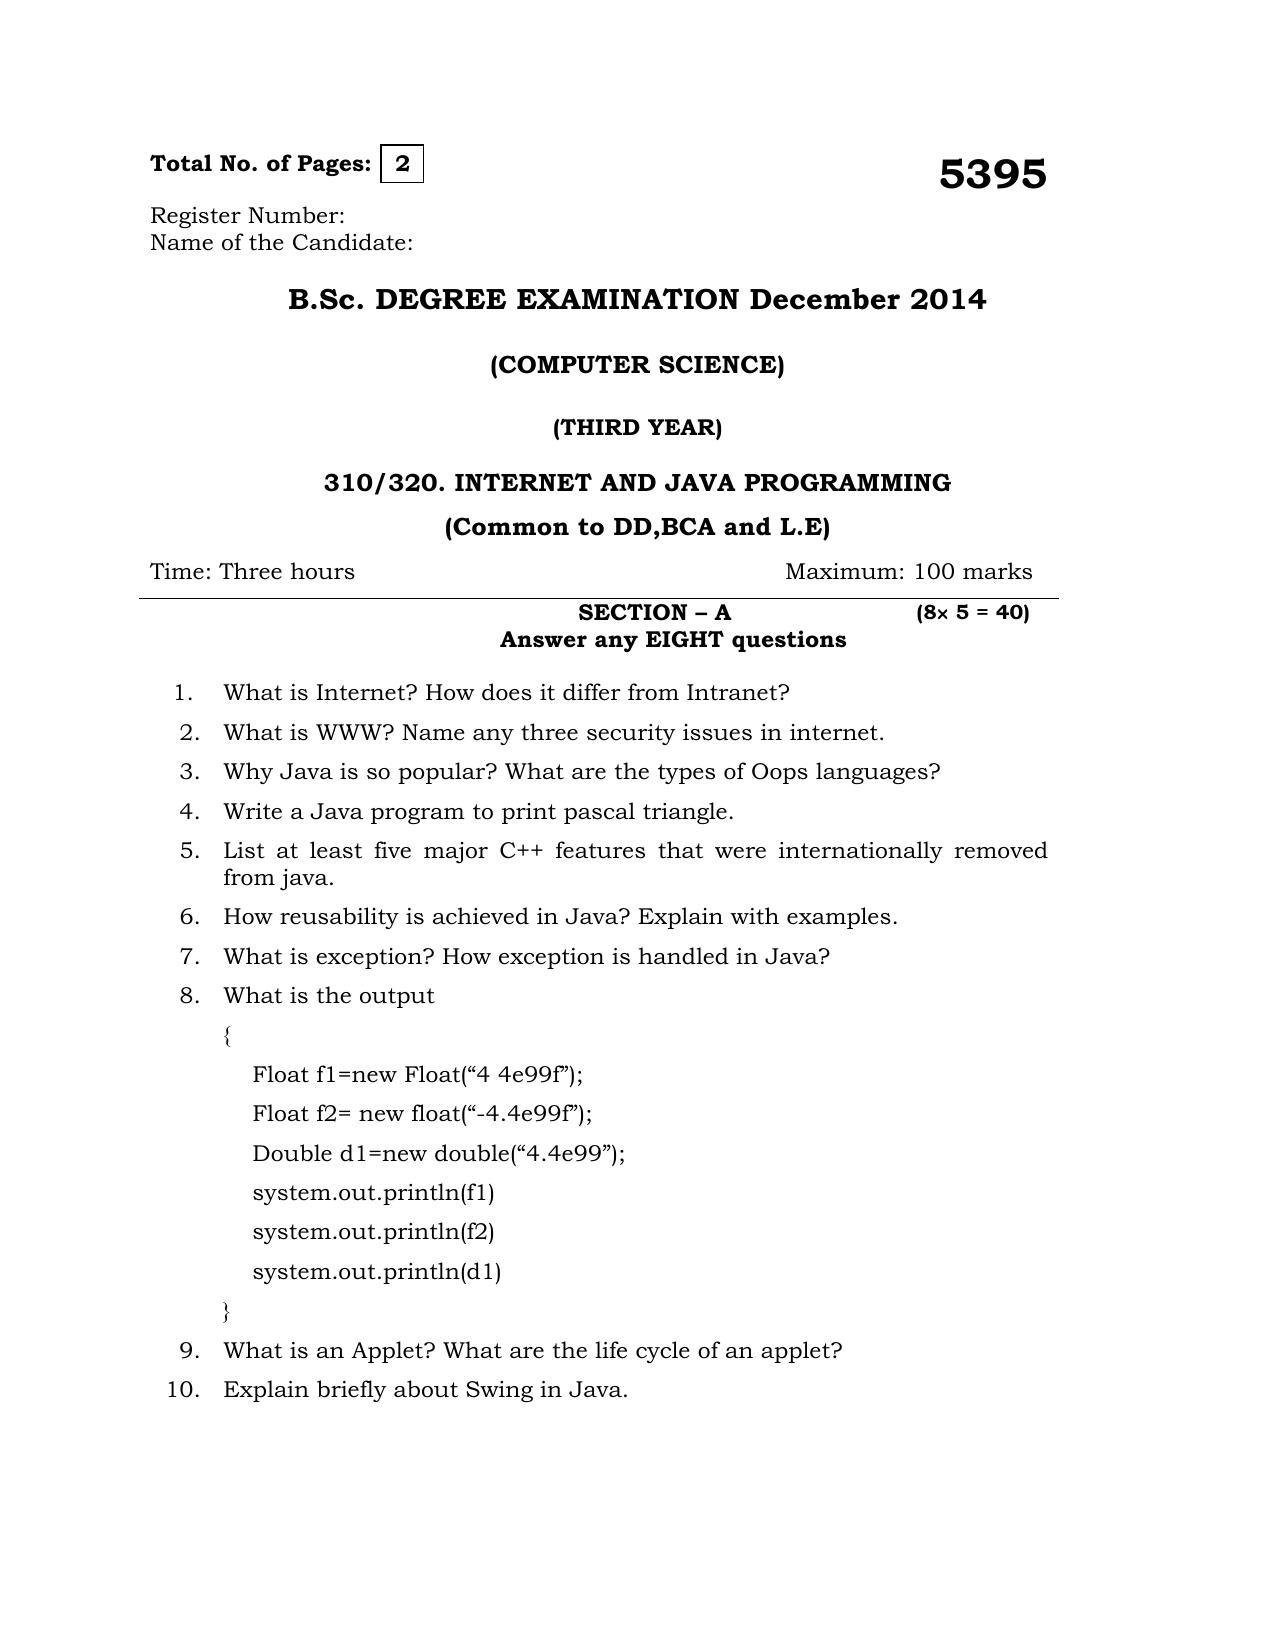 Annamalai University Internet And Java Programming B.C.A. (OUS) December 2014 Question Papers - Page 1